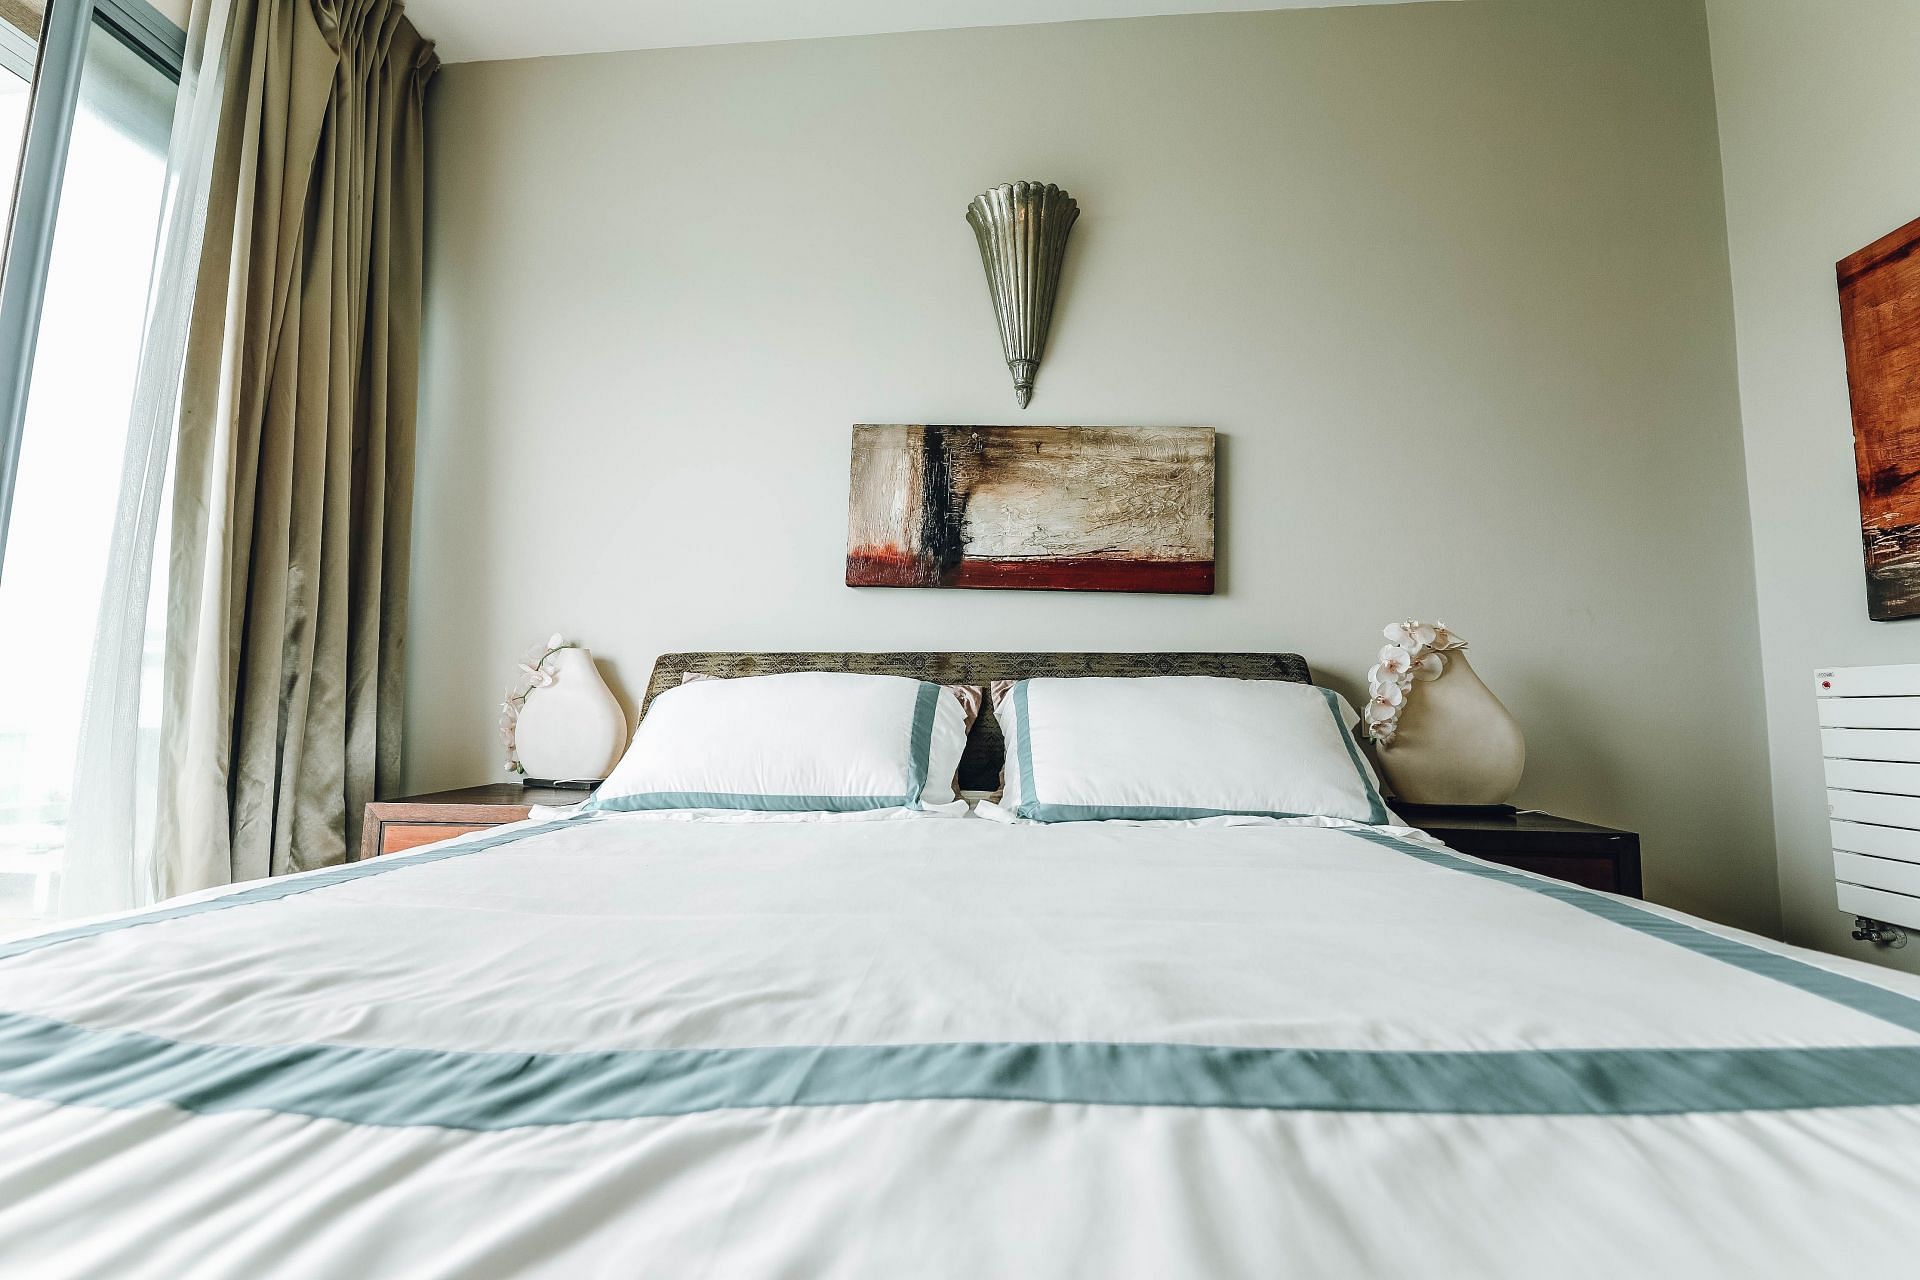 Benefits of clean bed sheets (image sourced via Pexels / Photo by Naim)